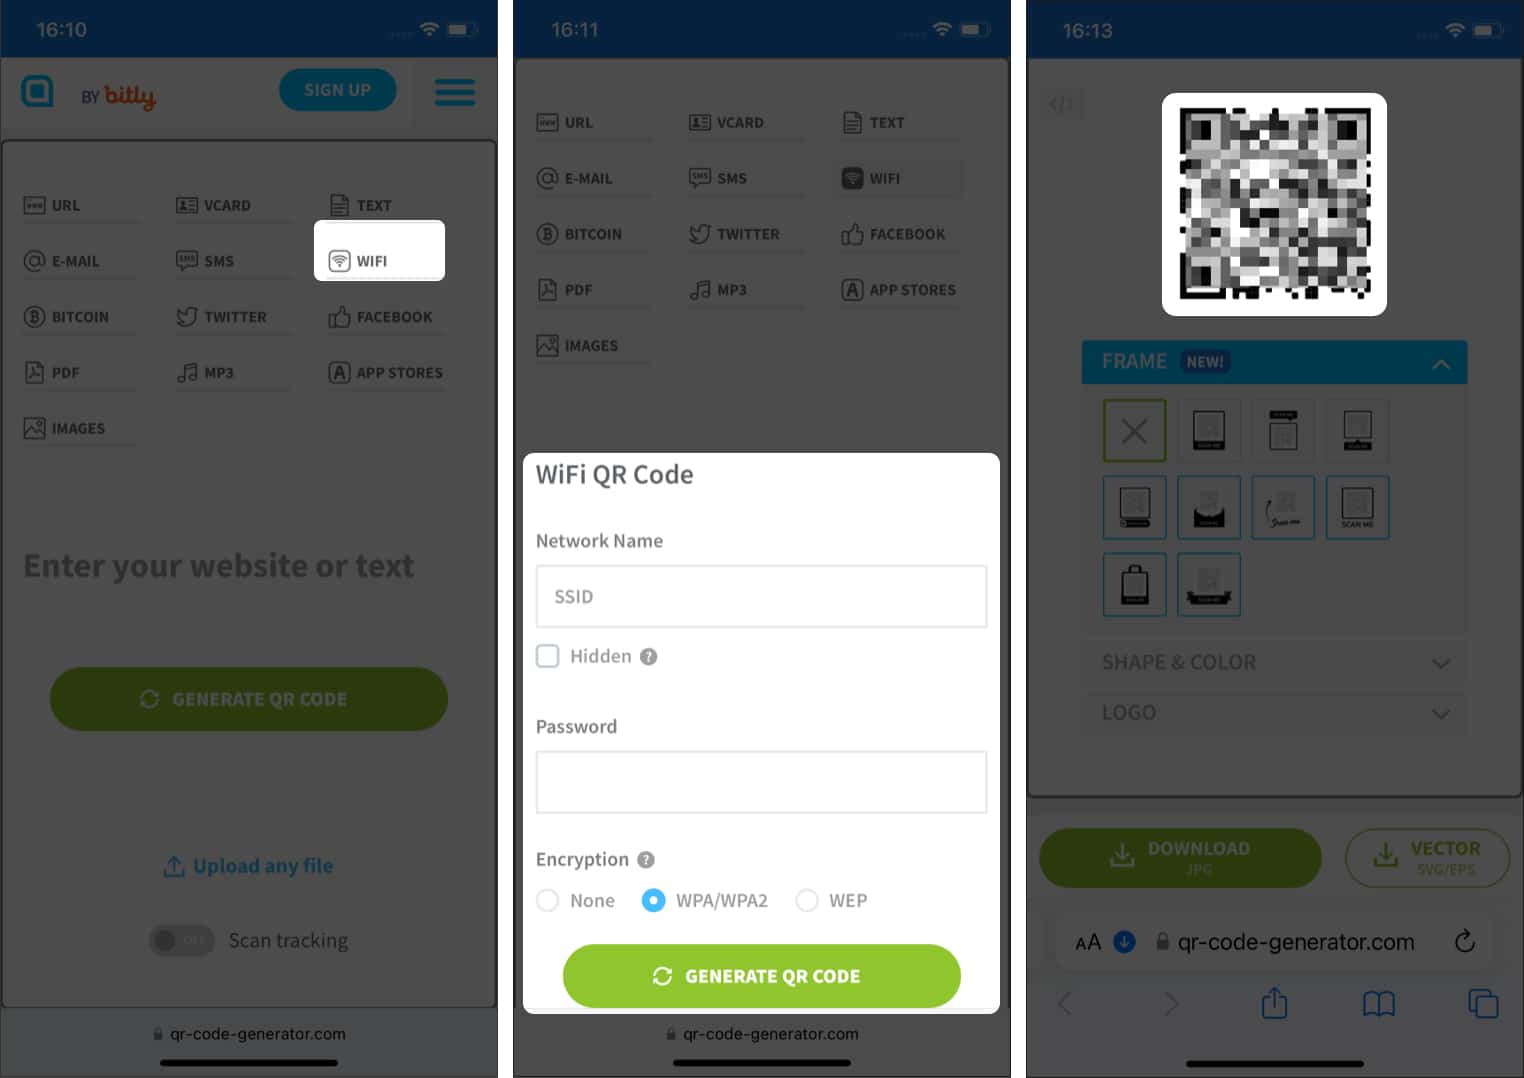 How to share WiFi password from iPhone by generating a QR code